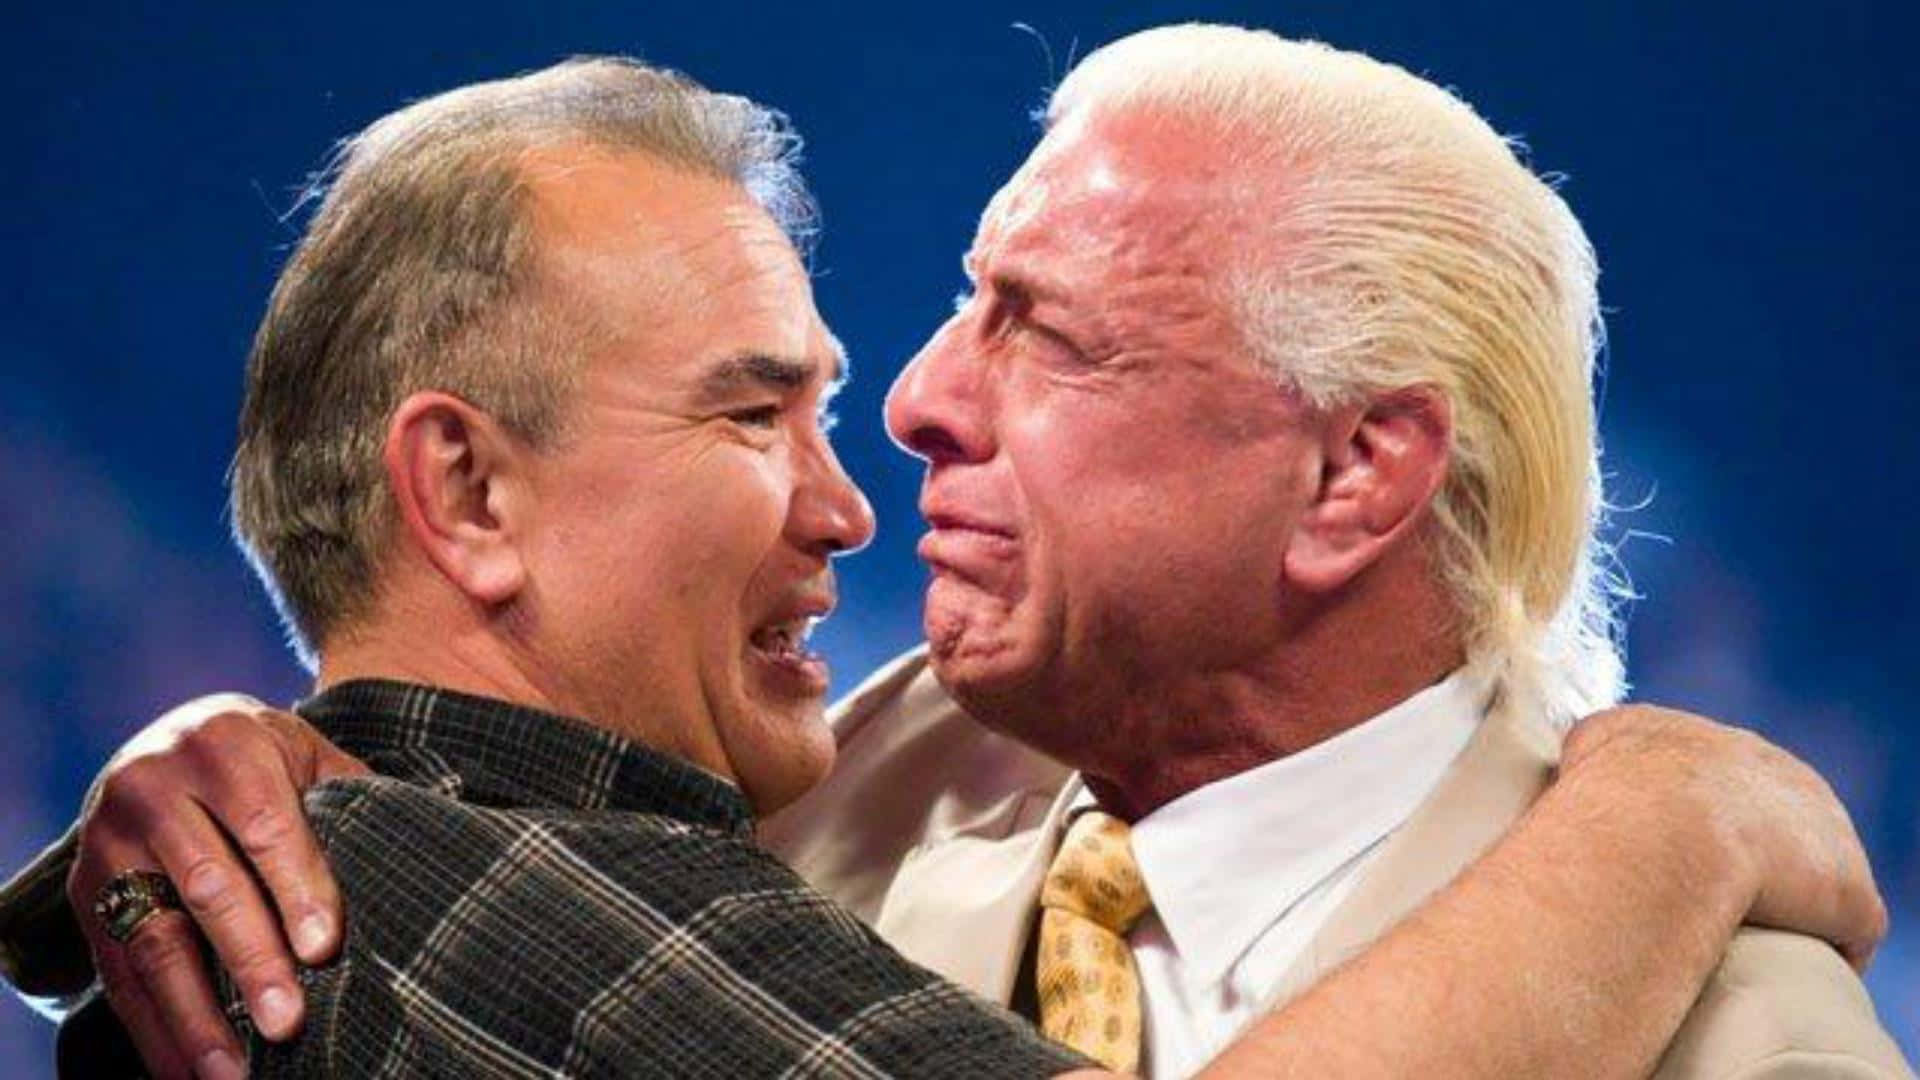 Renowned Wrestlers Ric Flair And Ricky Steamboat Sharing A Moment Background